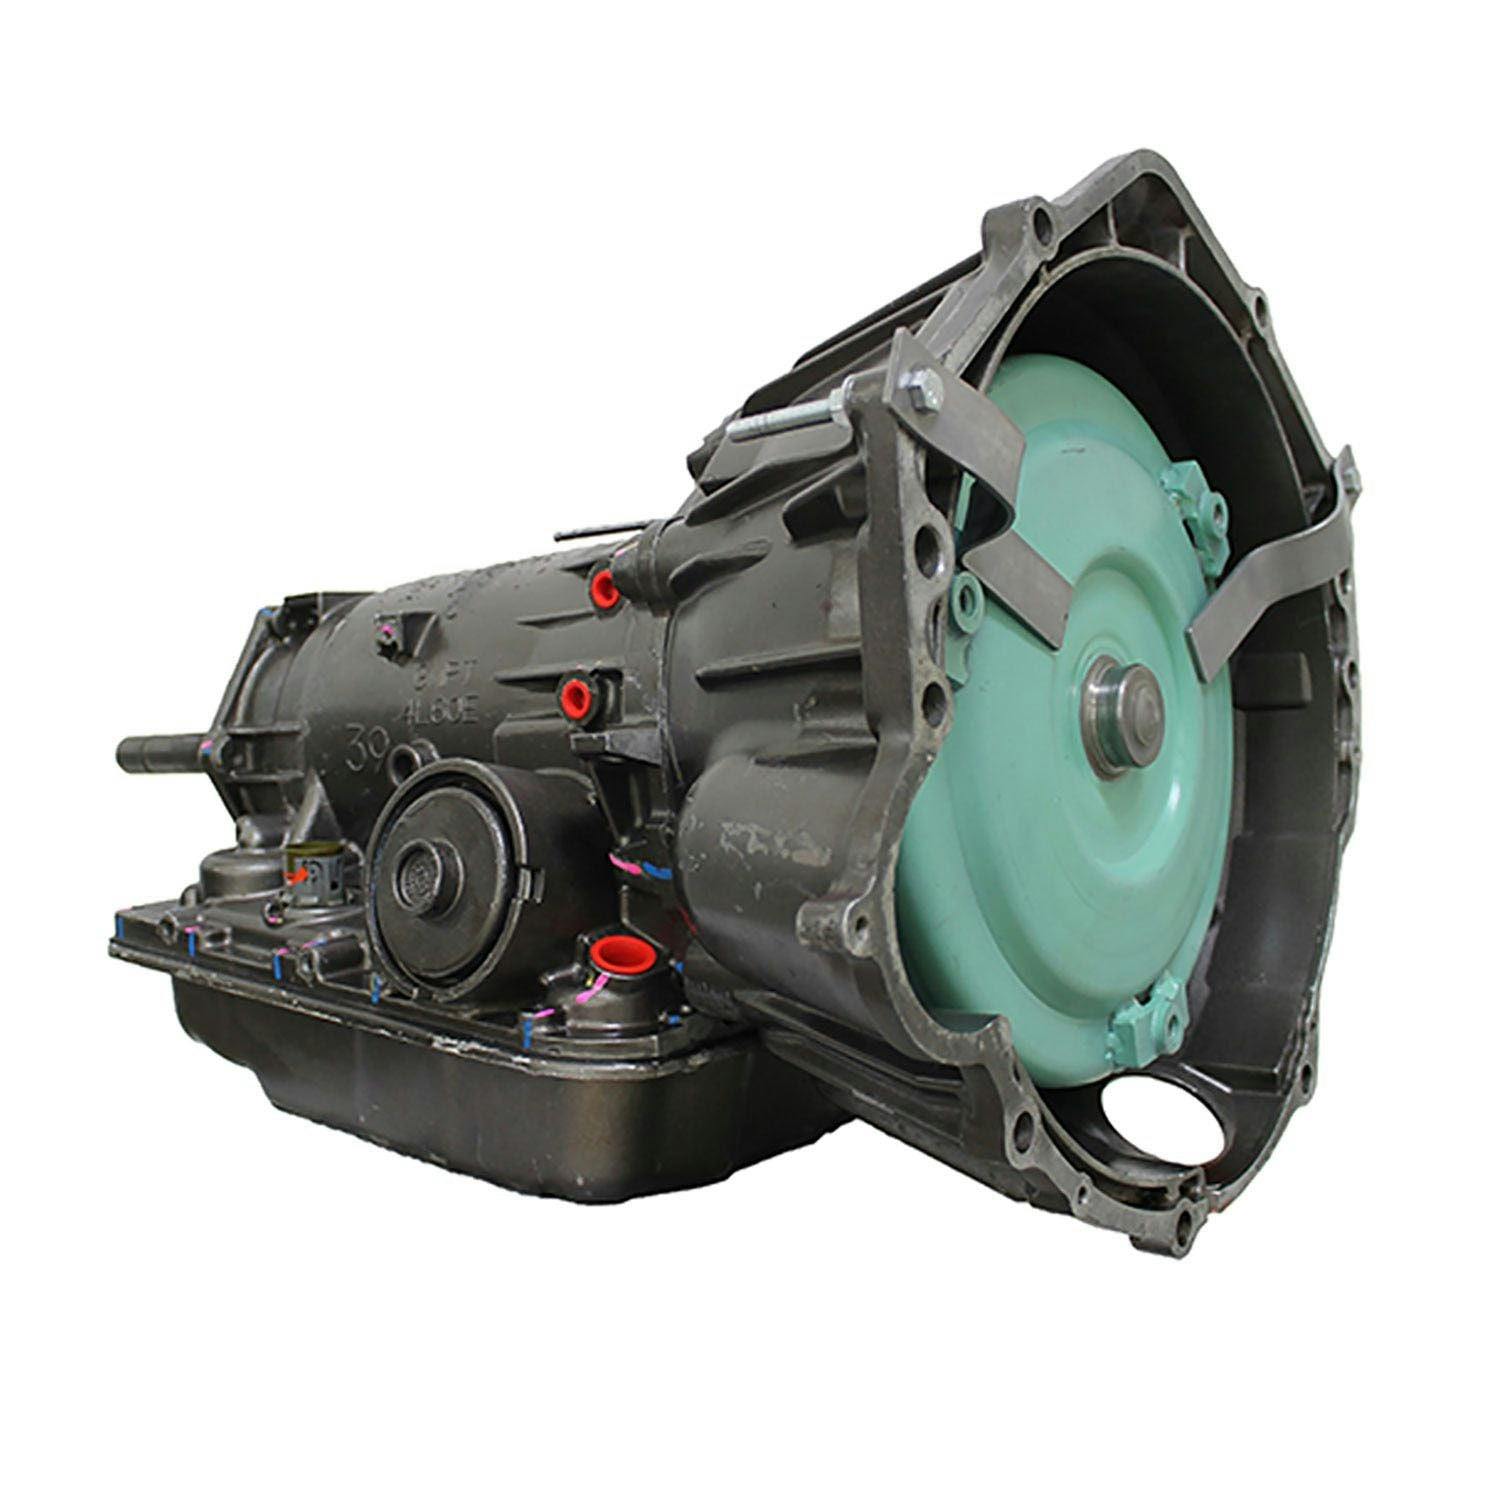 Automatic Transmission for 2003-2005 Chevrolet Astro/Blazer/S10 and GMC Jimmy/Safari/Sonoma 4WD with 4.3L V6 Engine